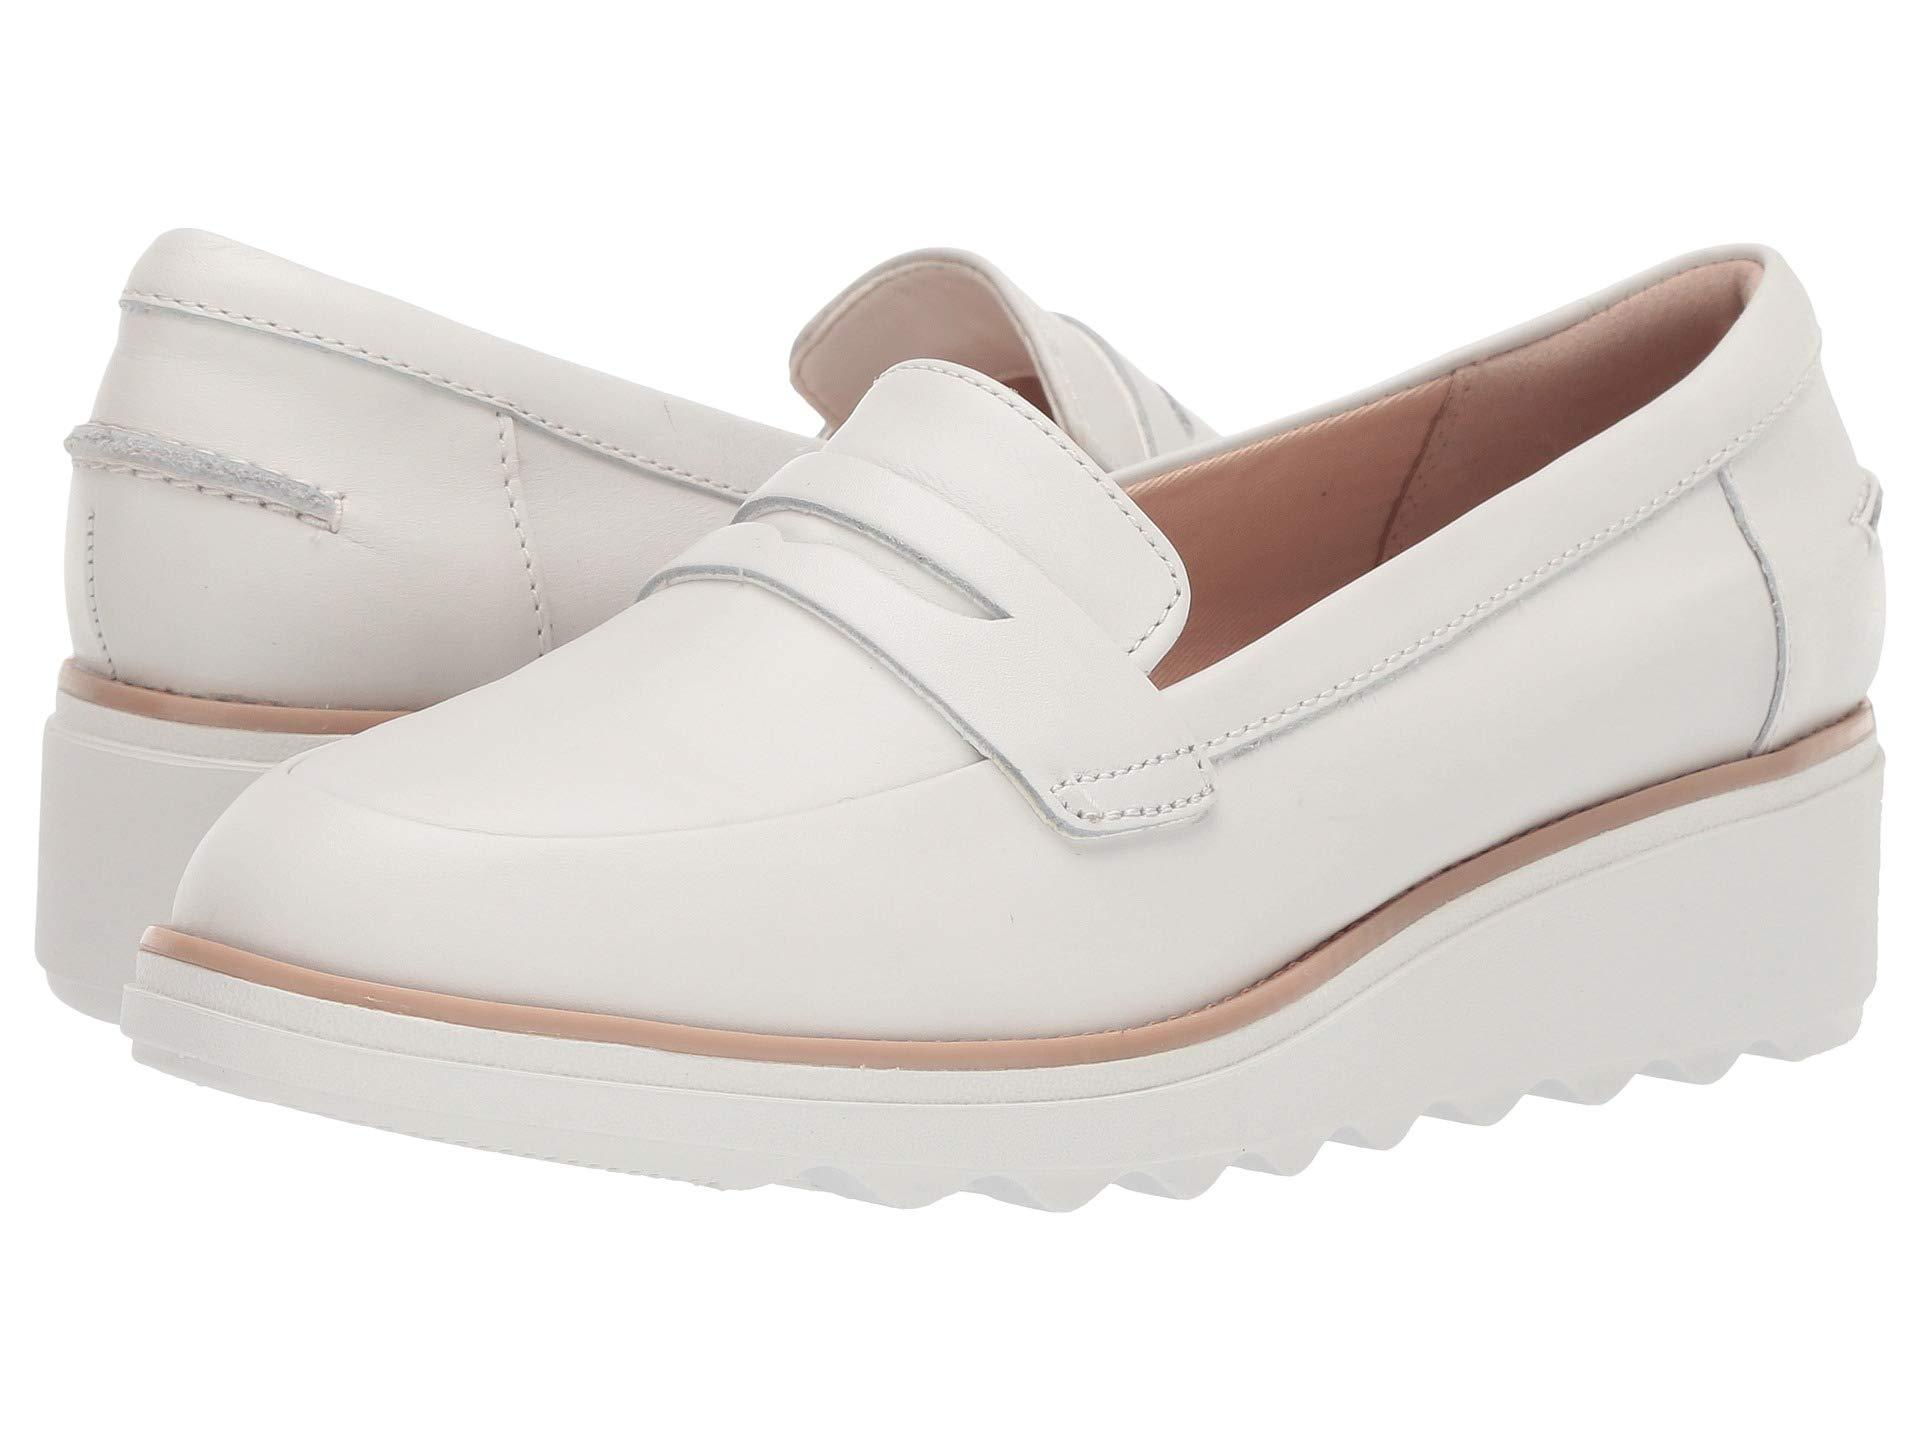 Clarks Sharon Ranch Womens Wedge Heel Penny Loafers in White | Lyst